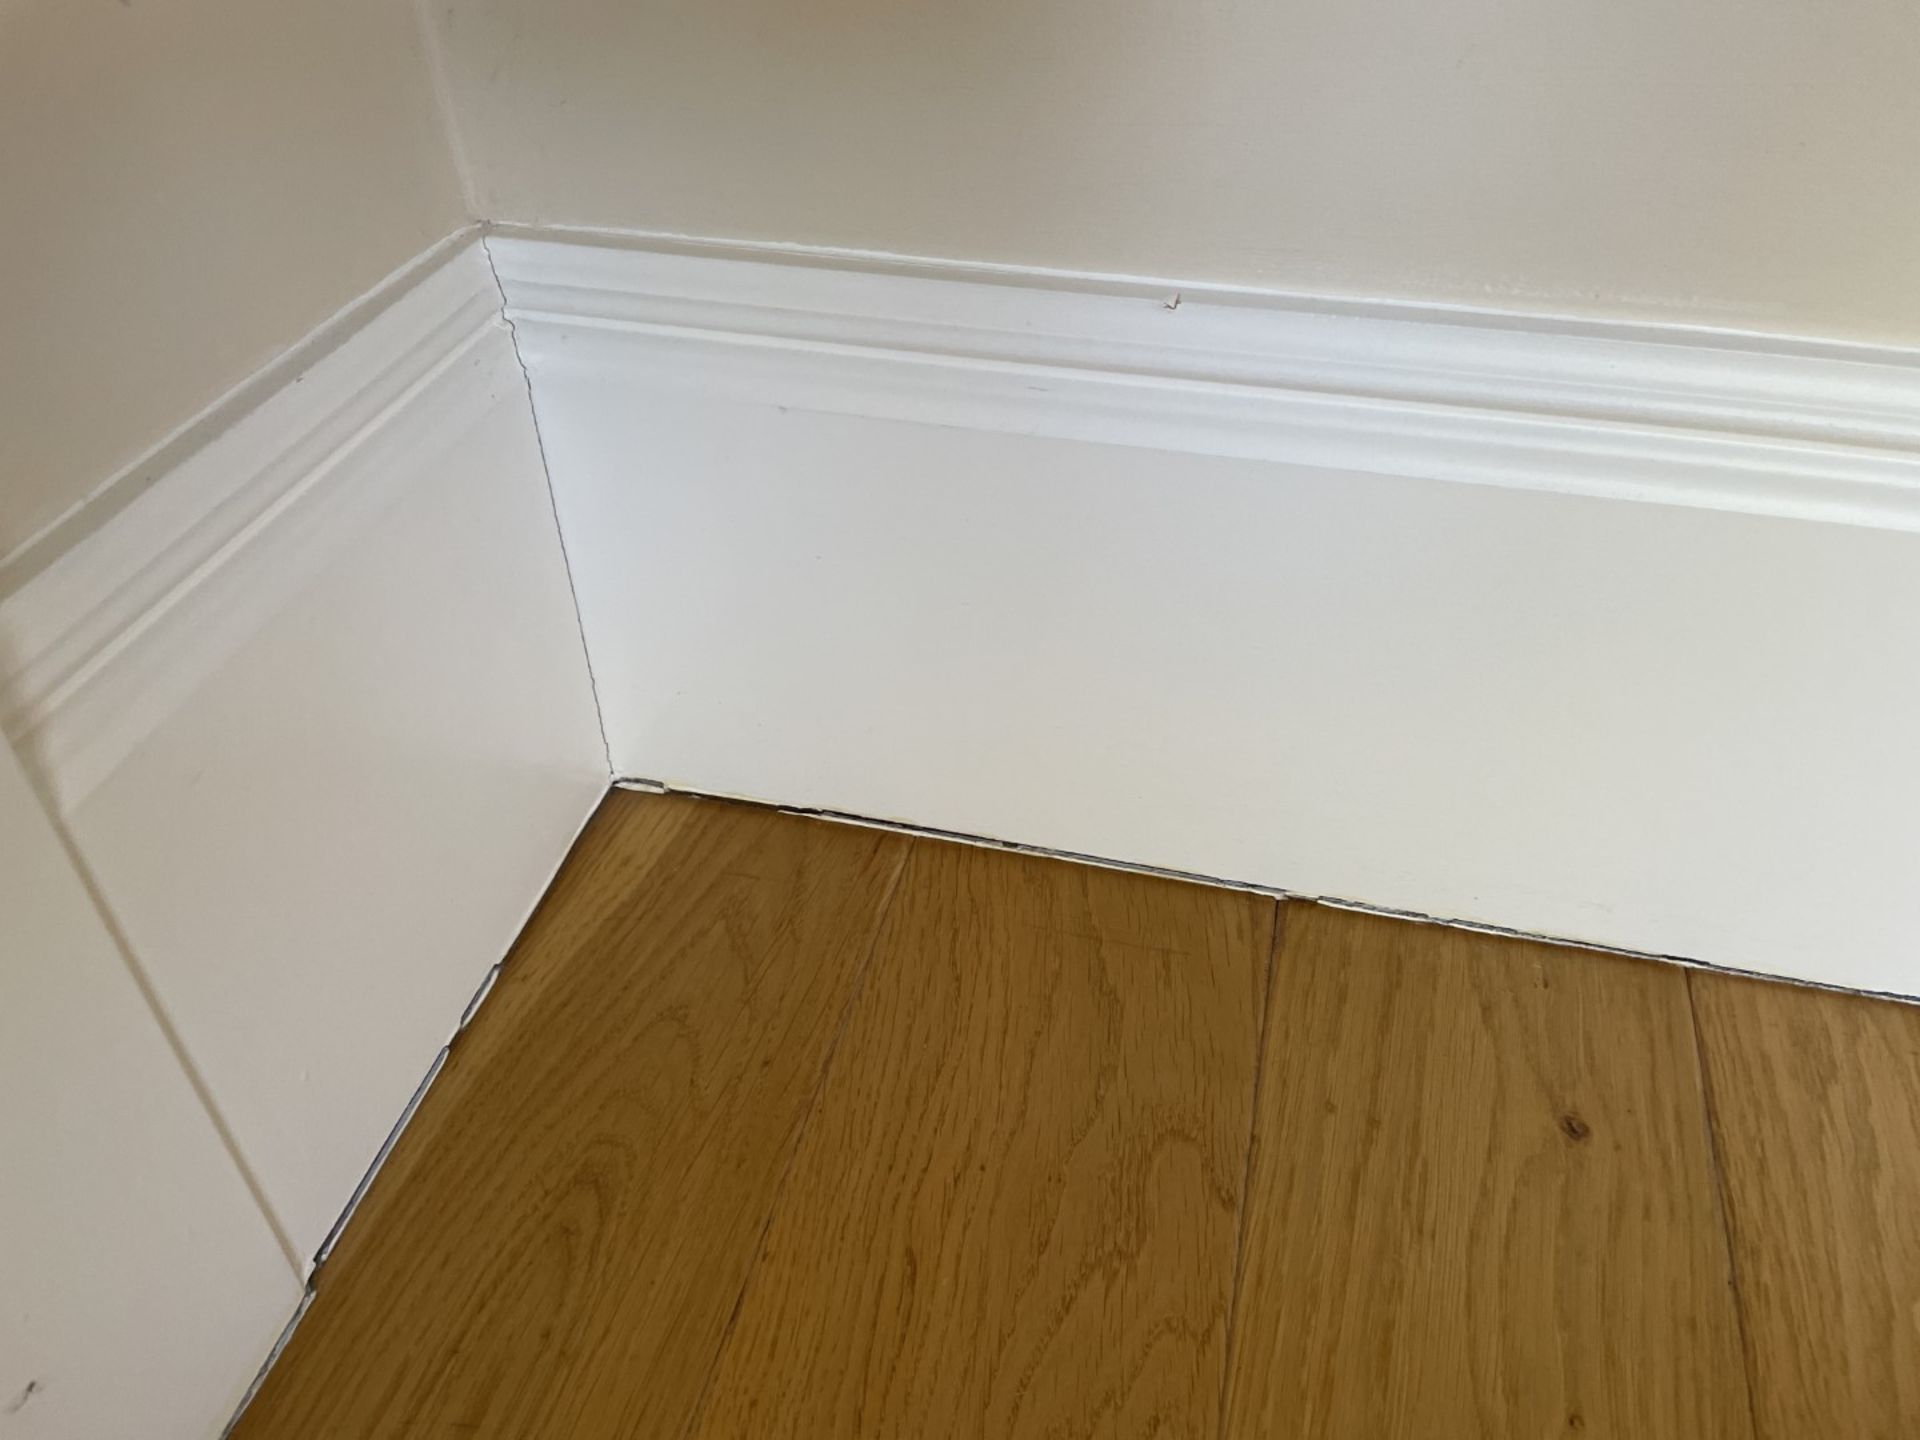 Approximately 8-Metres of Painted Timber Wooden Skirting Boards, In White - Ref: PAN213 - CL896 - NO - Image 3 of 4